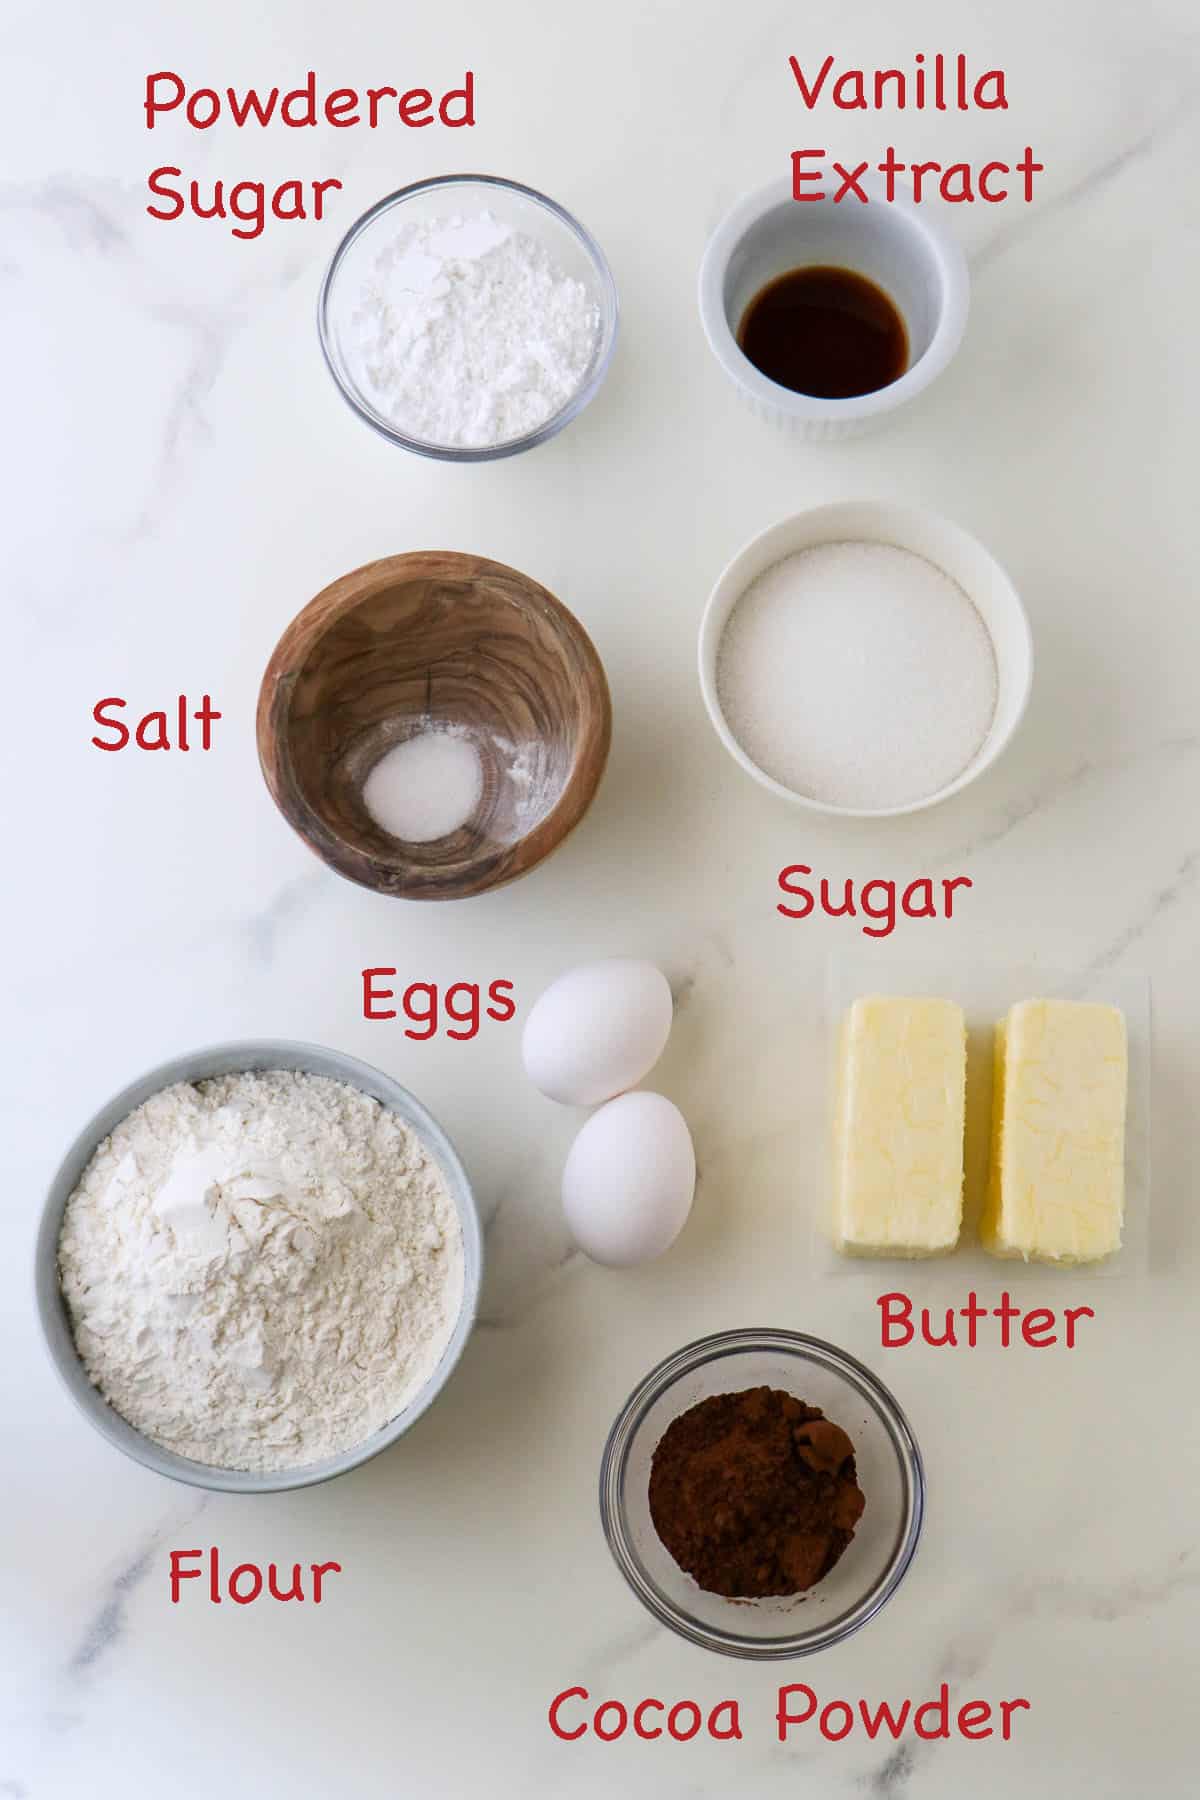 Labeled ingredients for Checkerboard Cookies.